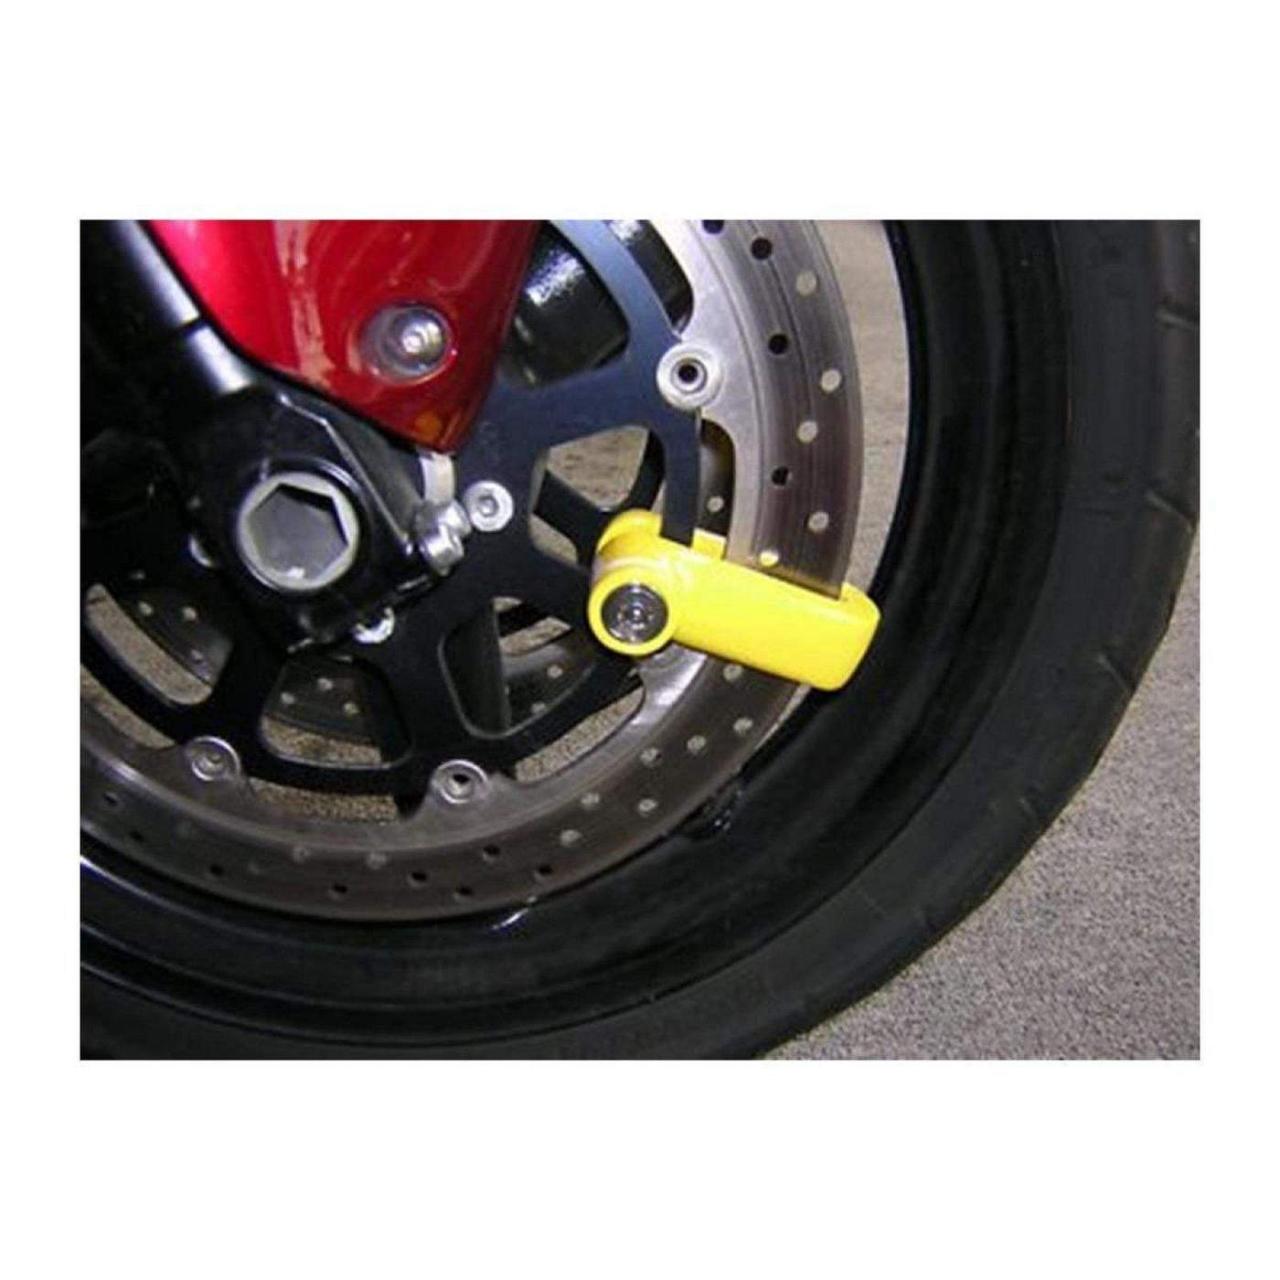 Best Motorcycle Disc Lock for Highs Security